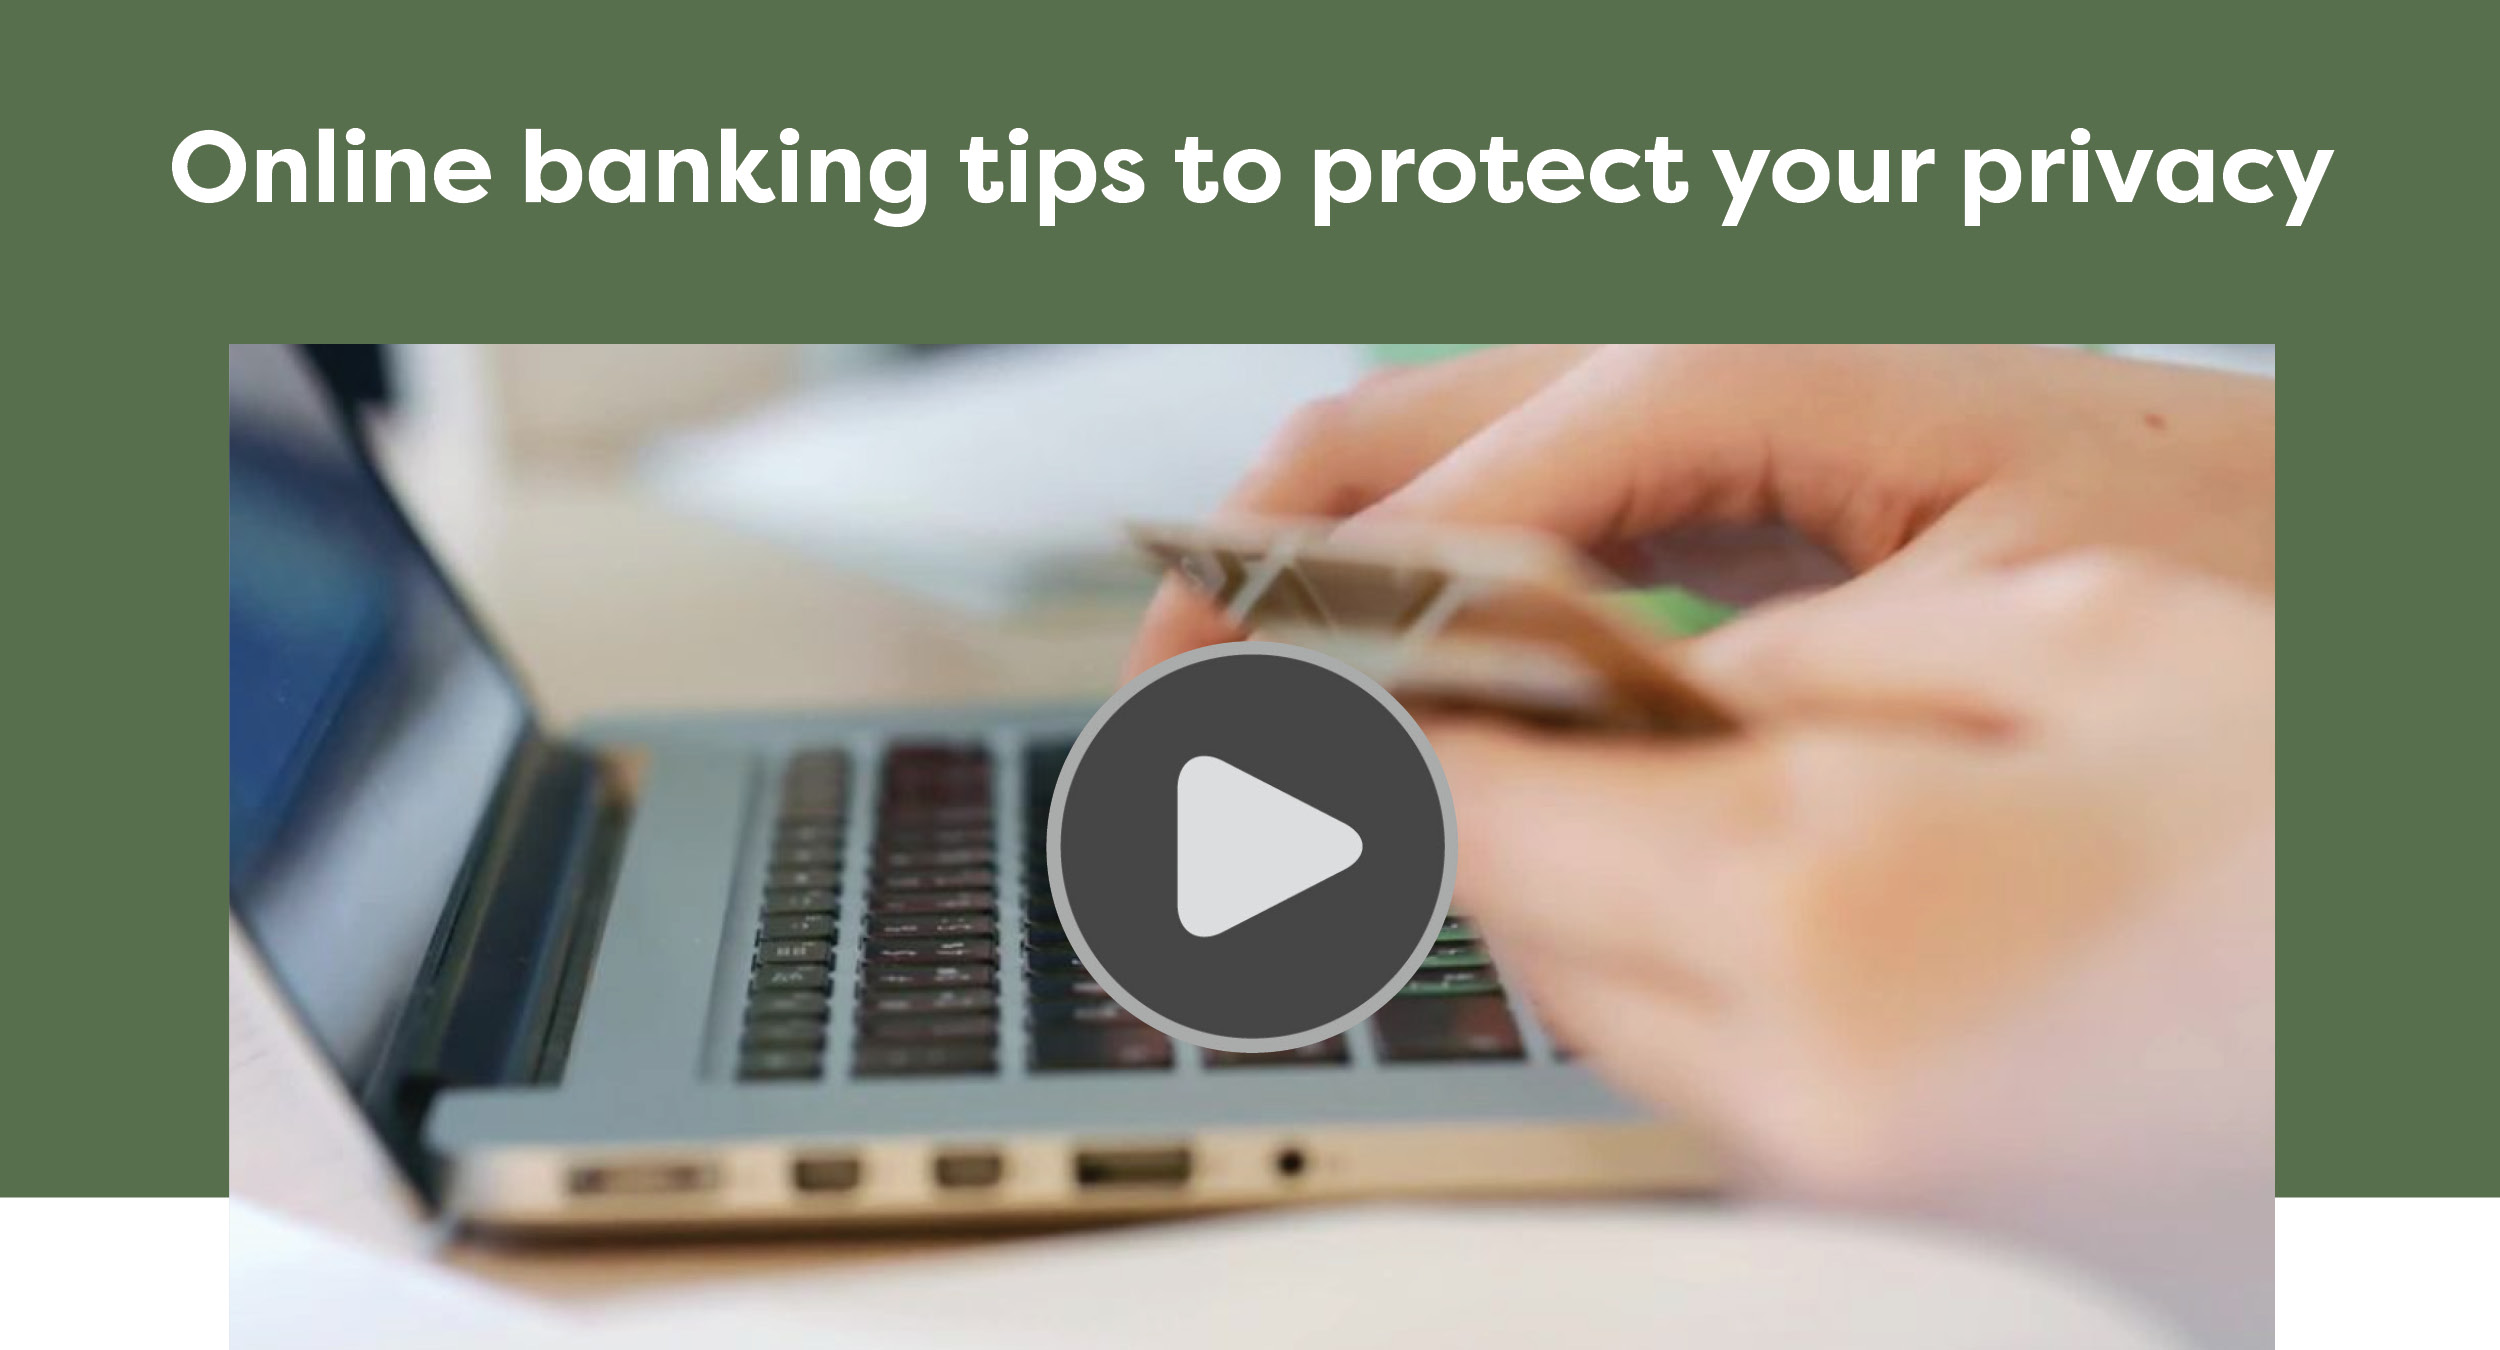 Online banking tips to protect your privacy